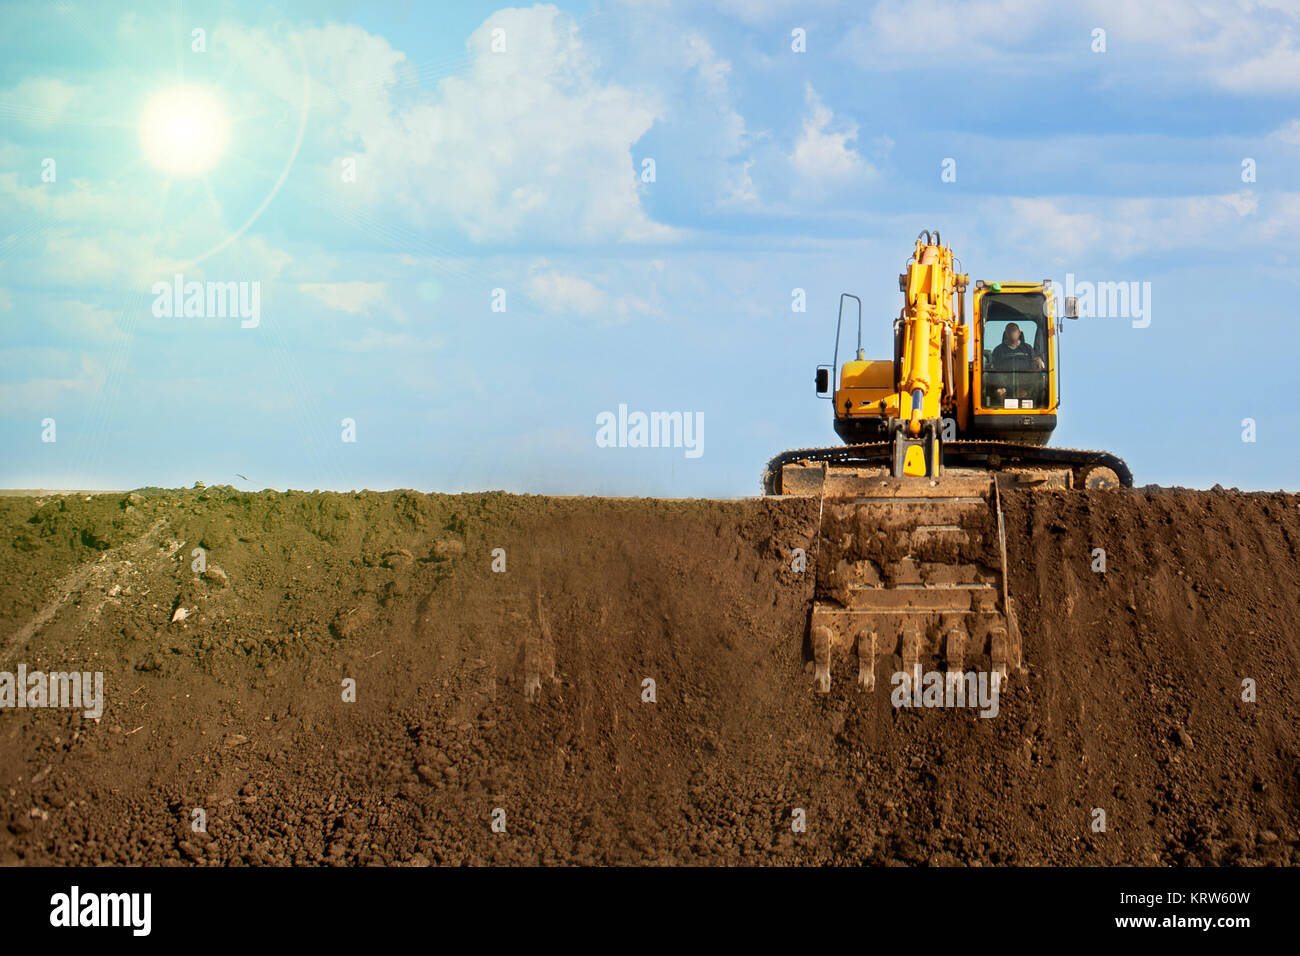 Close-up of a construction site excavator Stock Photo